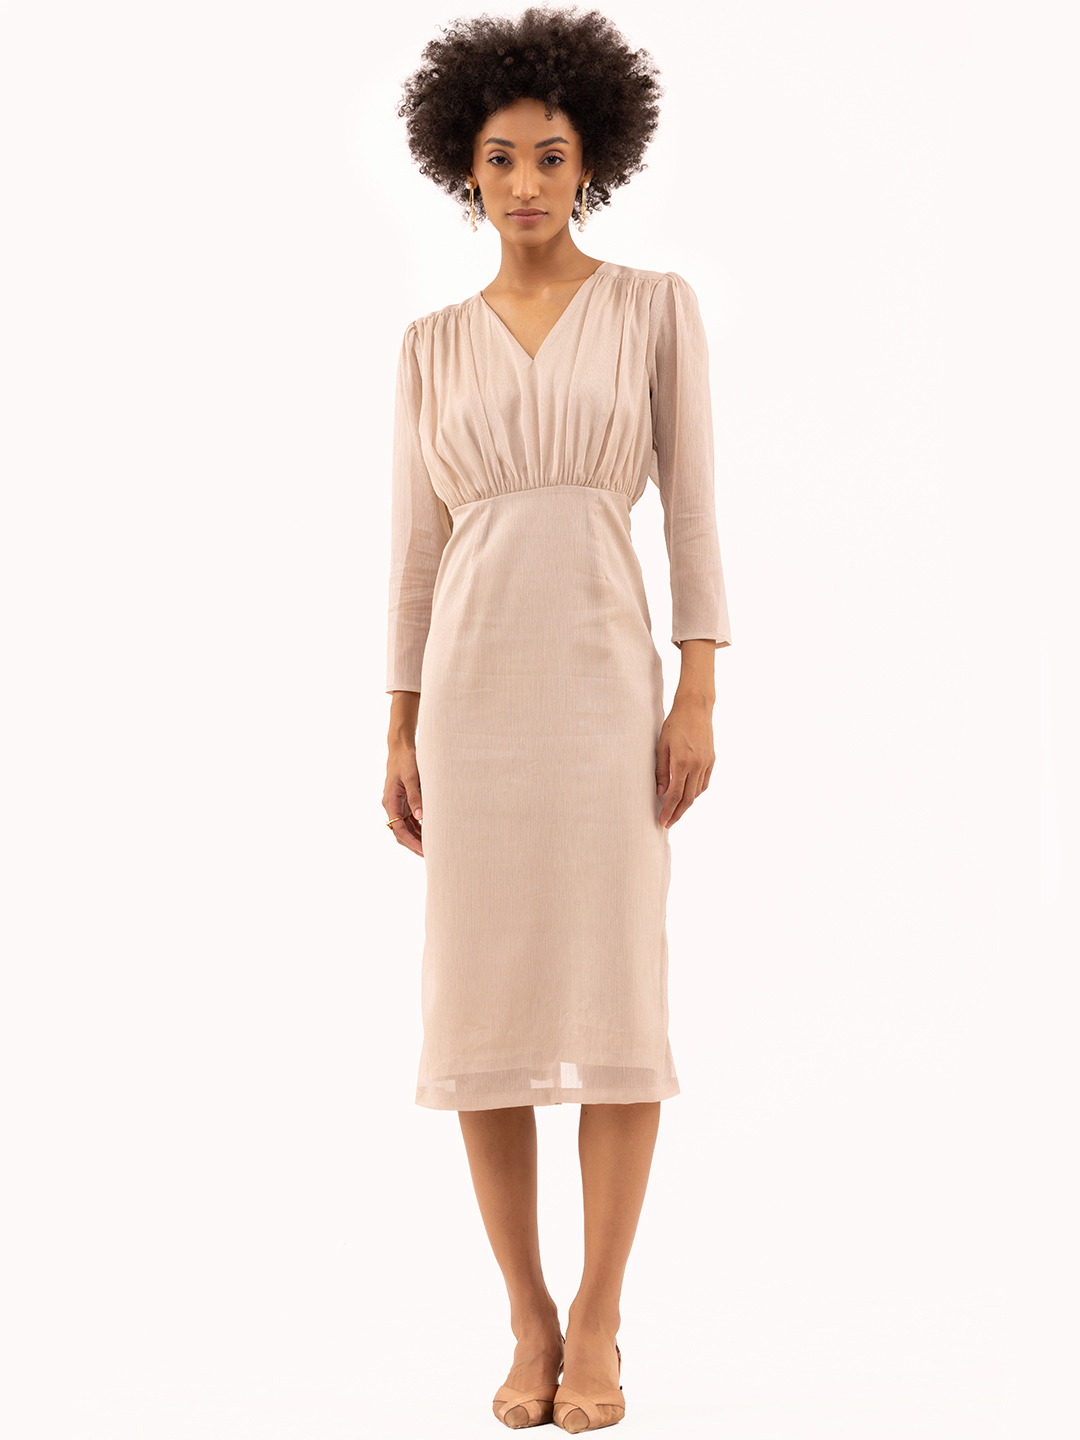 Gathered Fitted Calf Length Dress Beige - Main